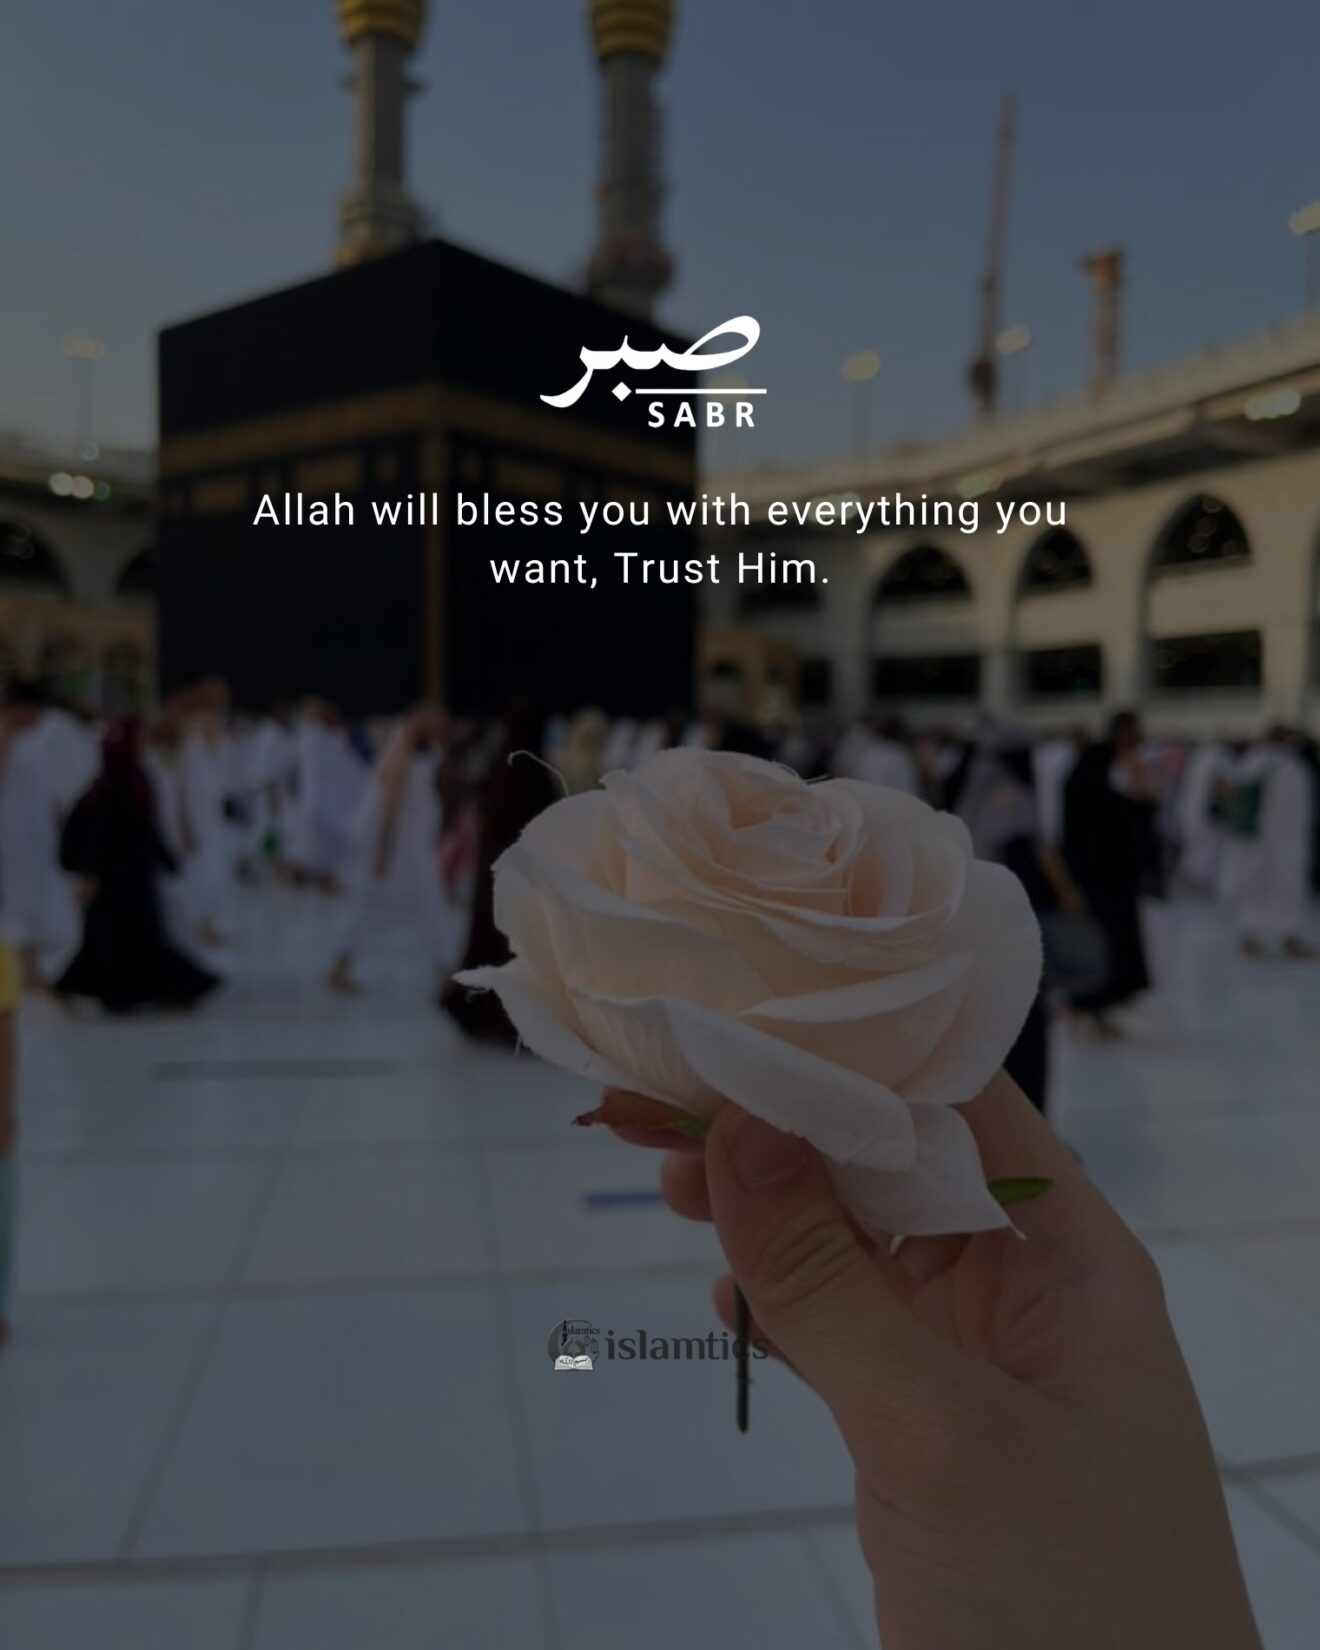 Allah will bless you with everything you want, Trust Him.